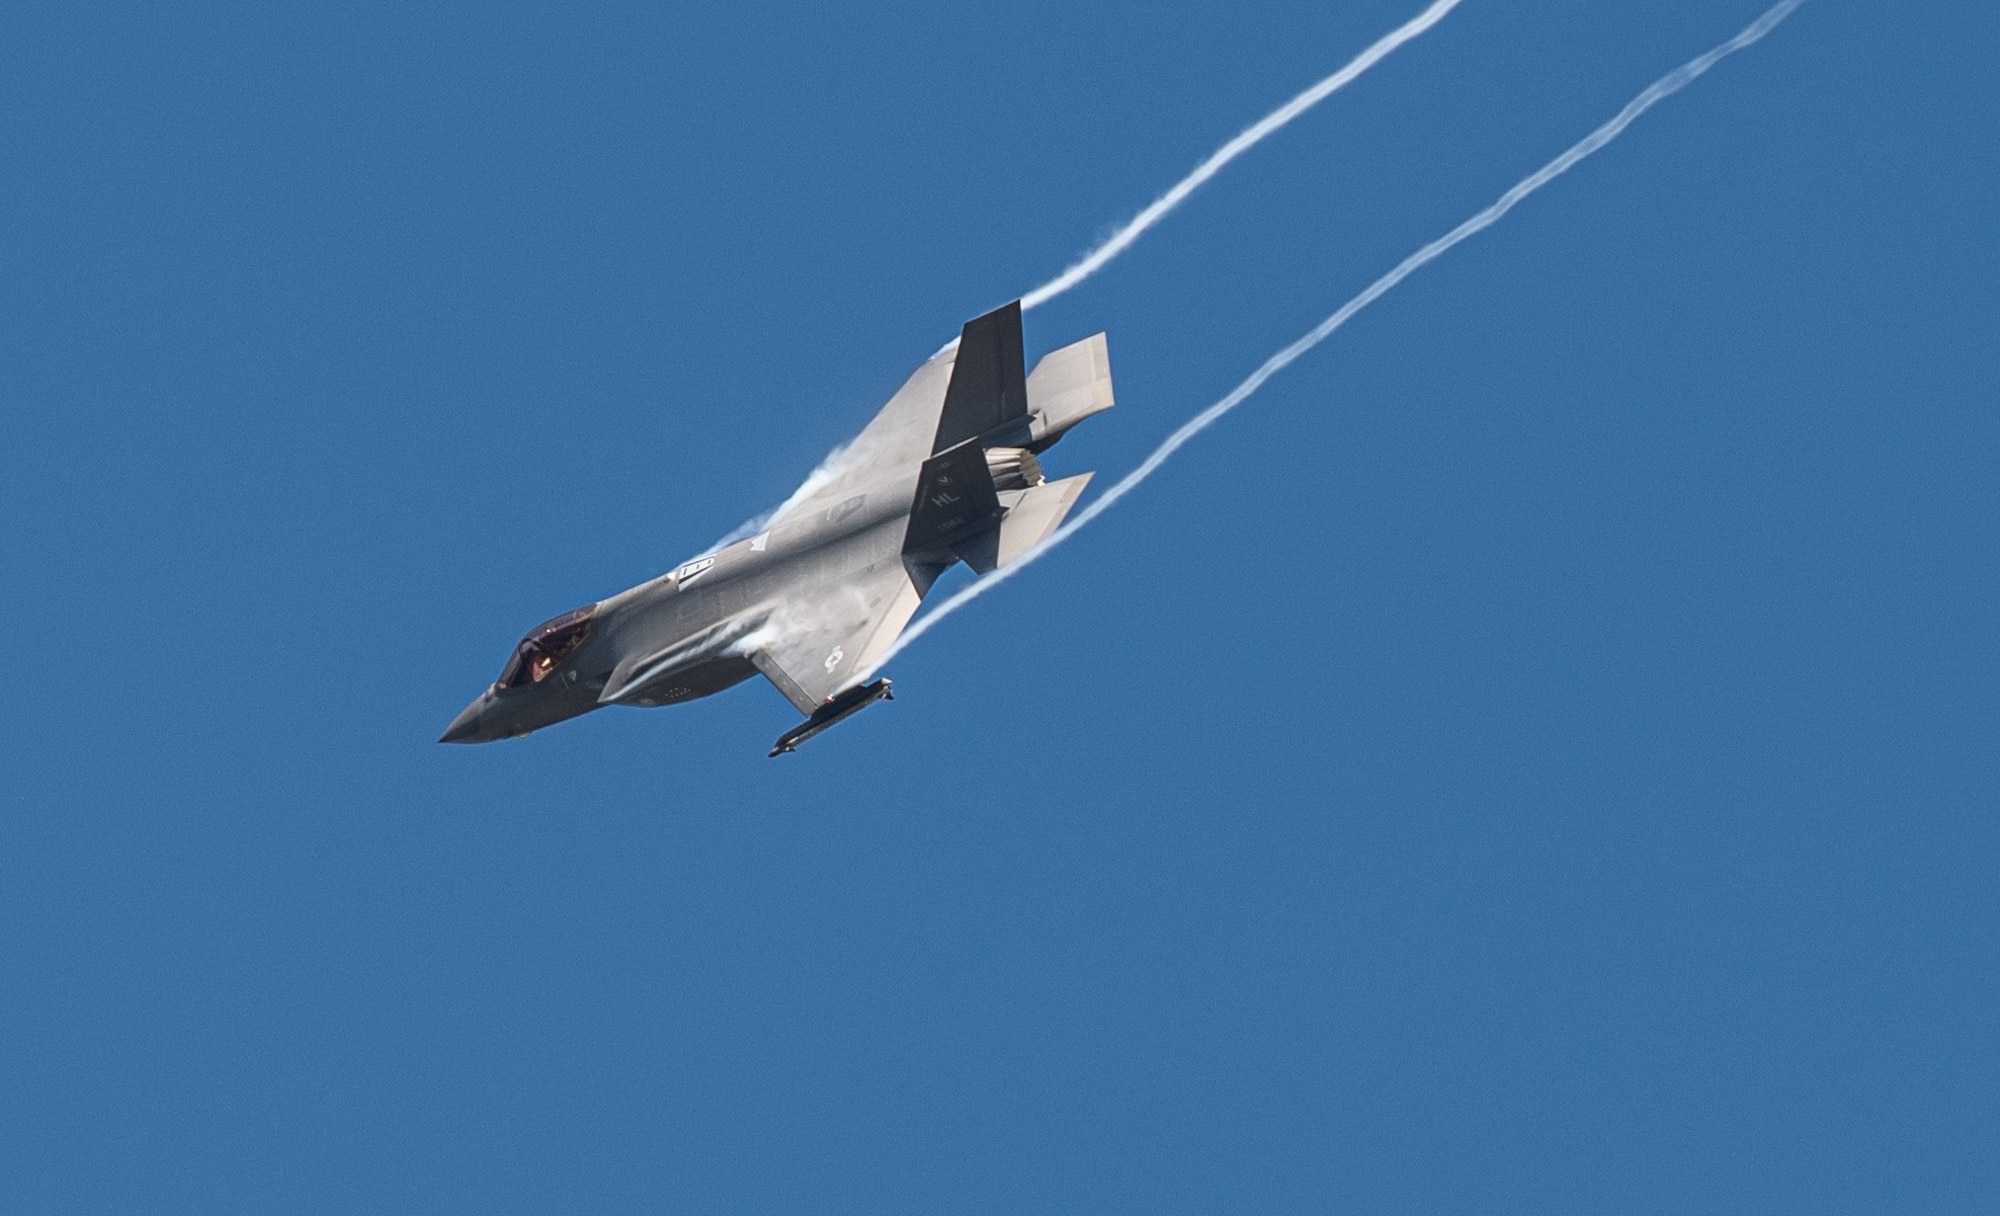 An F-35A Lightning II from Hill Air Force Base, Utah, takes flight during Sentry Savannah in Georgia. The 419th Fighter Wing at Hill AFB sent Air Force reservists and F-35s to support the Air National Guard’s largest fourth- and fifth-generation fighter aircraft exercise.